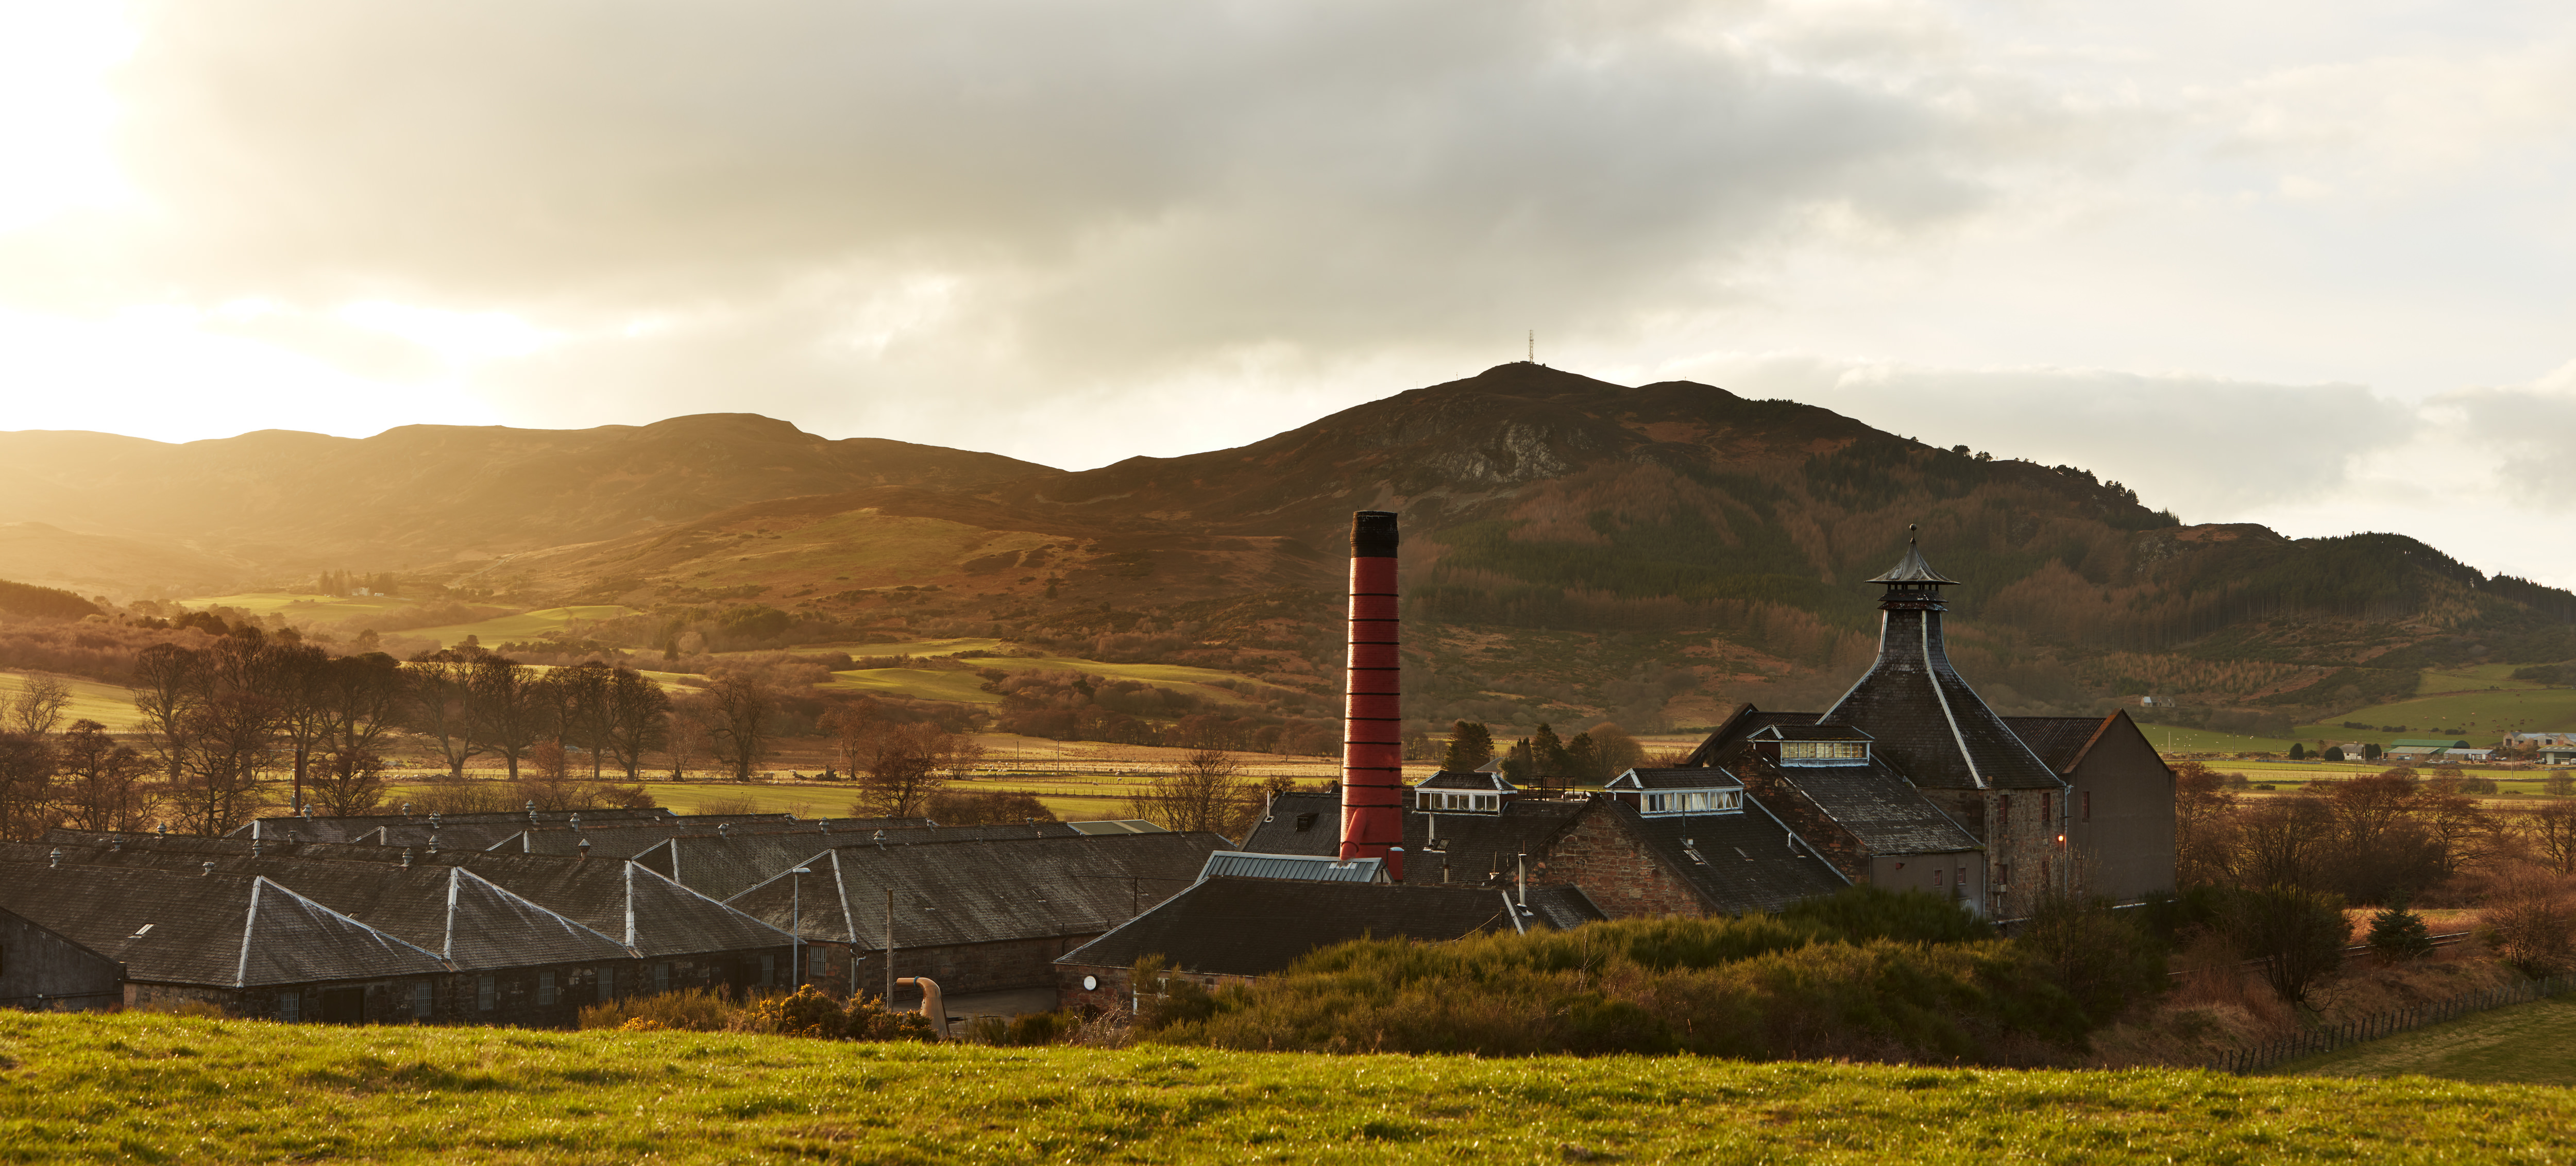 Balblair Distillery - tucked away in the ancient heart of the Highlands, you’ll find the Balblair distillery.
